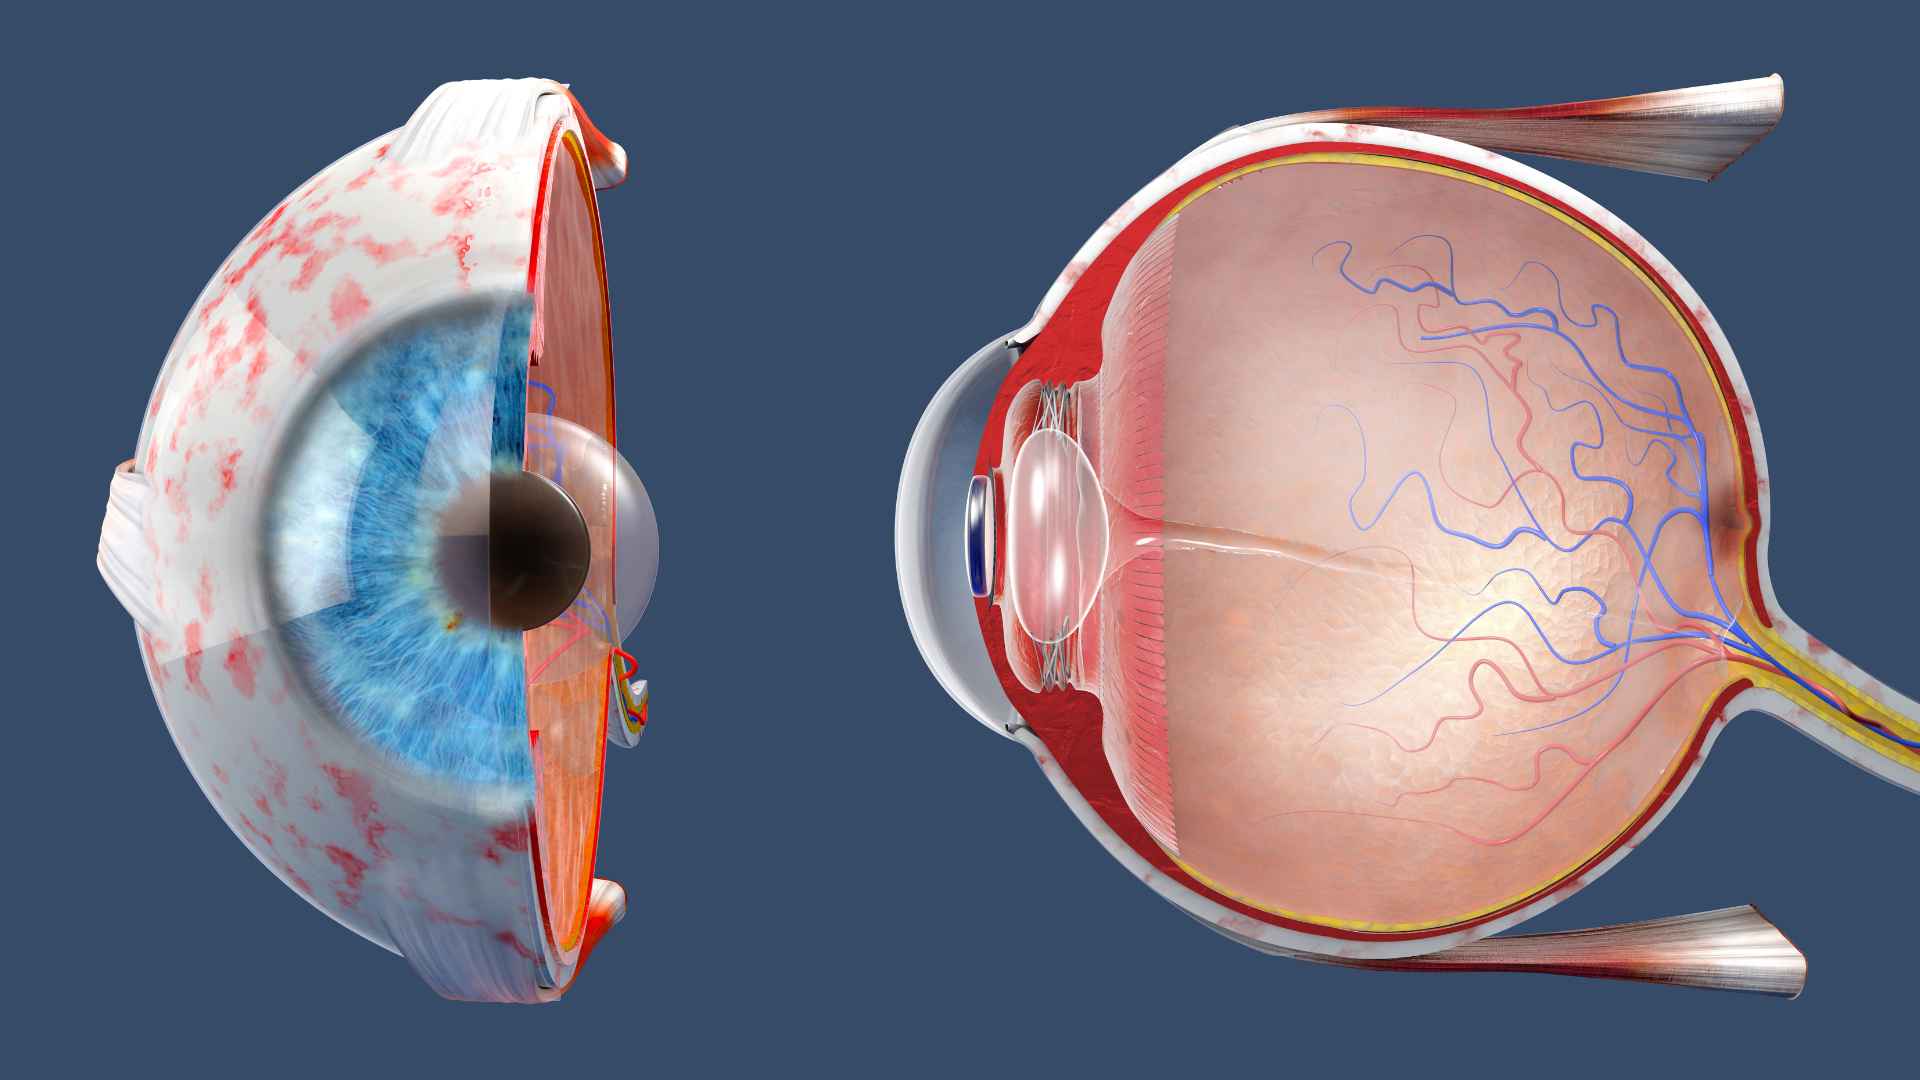 Image of eye and the cornea - the domed shaped outer most part of the eye.